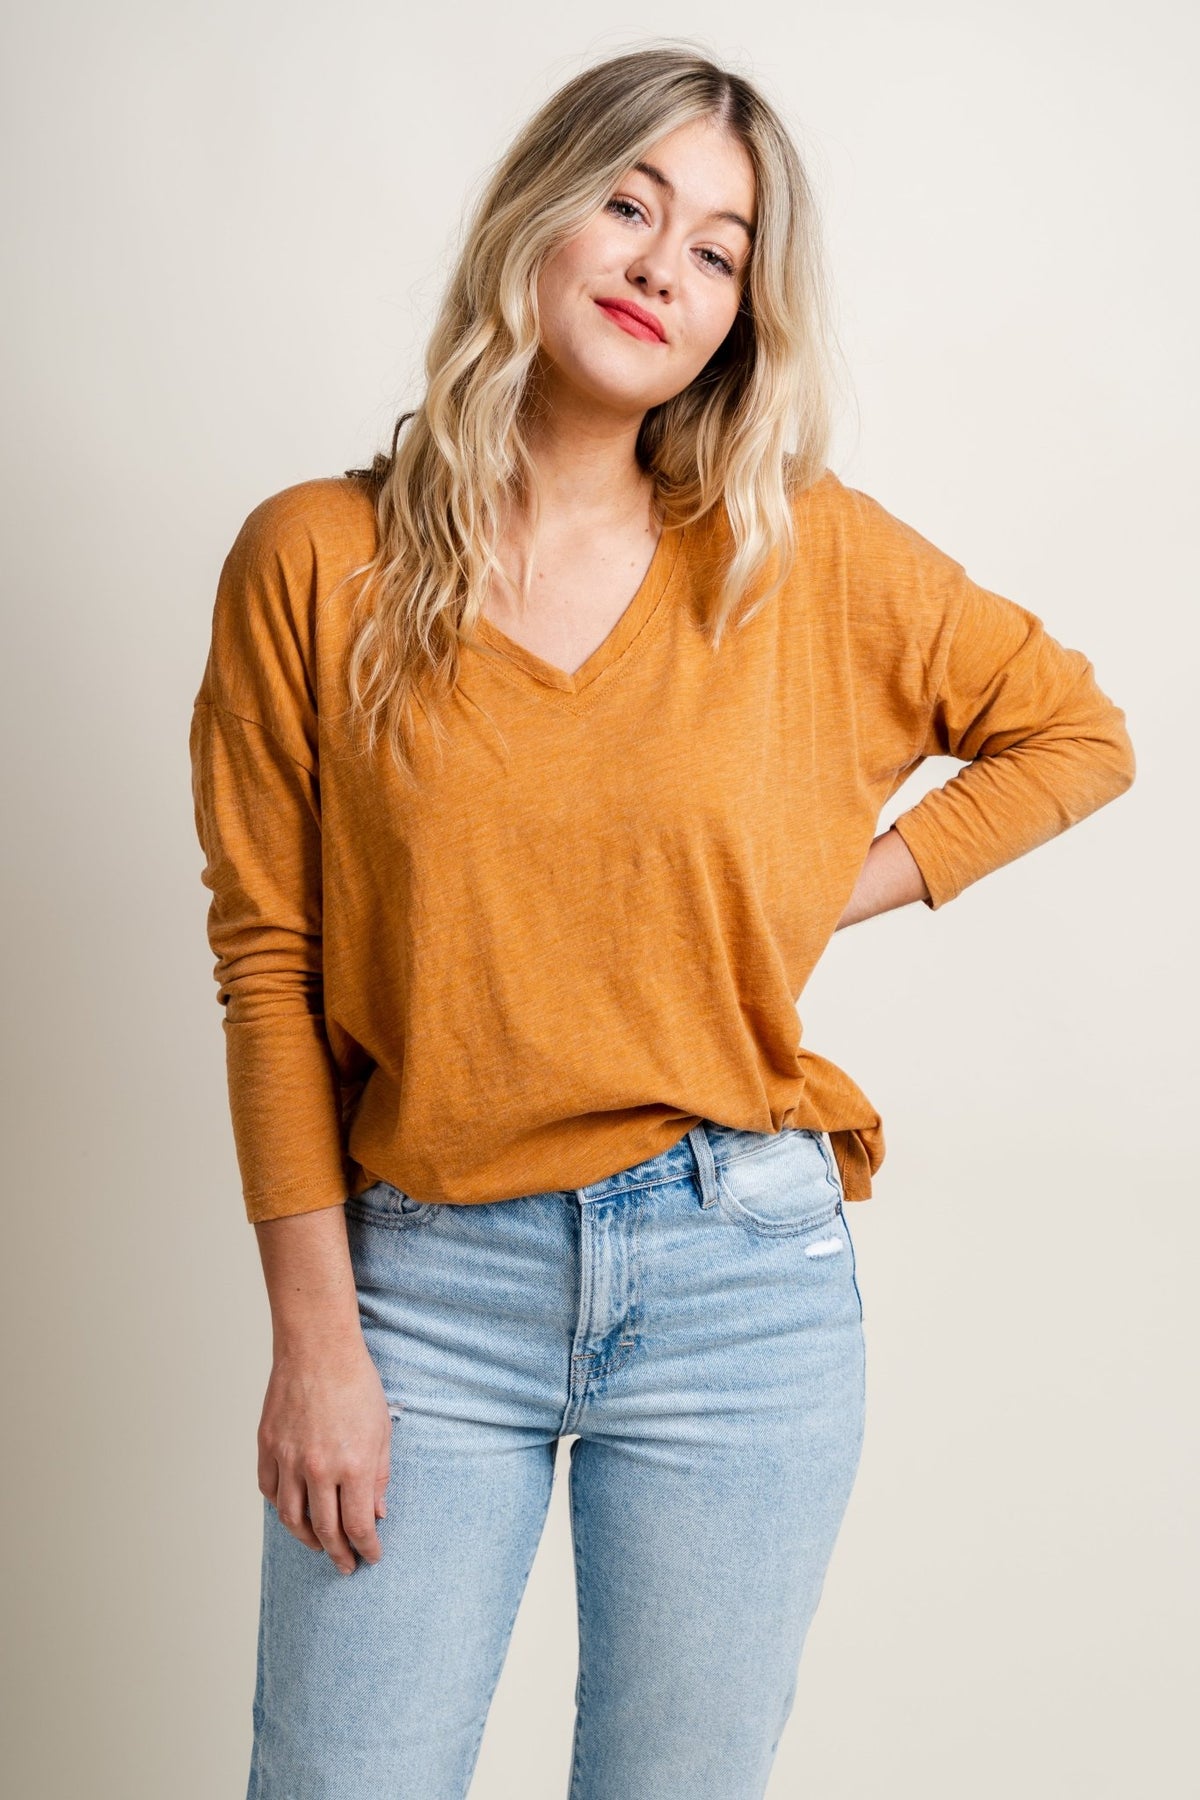 Z Supply super chill long sleeve tee spice - Z Supply T-shirts - Z Supply Tops, Dresses, Tanks, Tees, Cardigans, Joggers and Loungewear at Lush Fashion Lounge